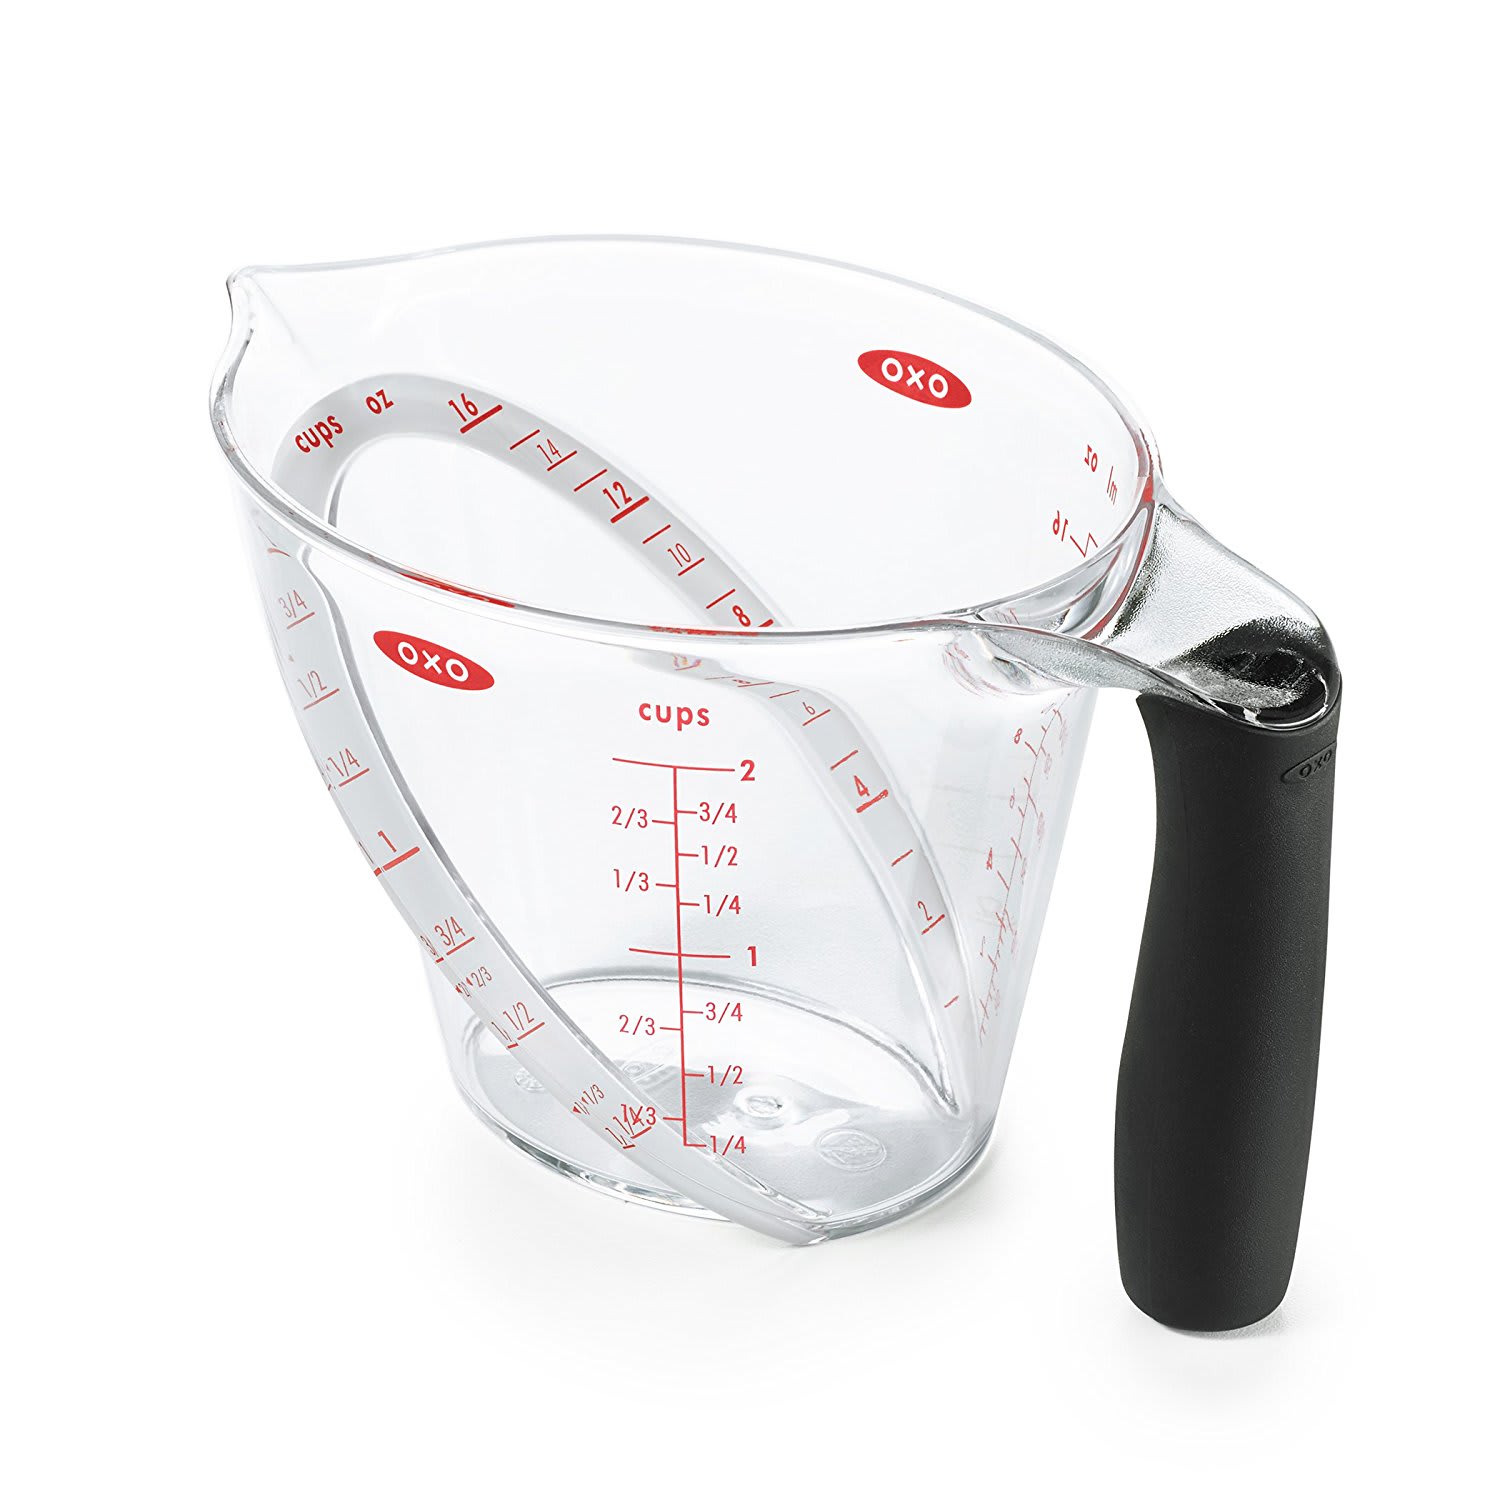 An Honest Review of OXO's Angled Measuring Bucket